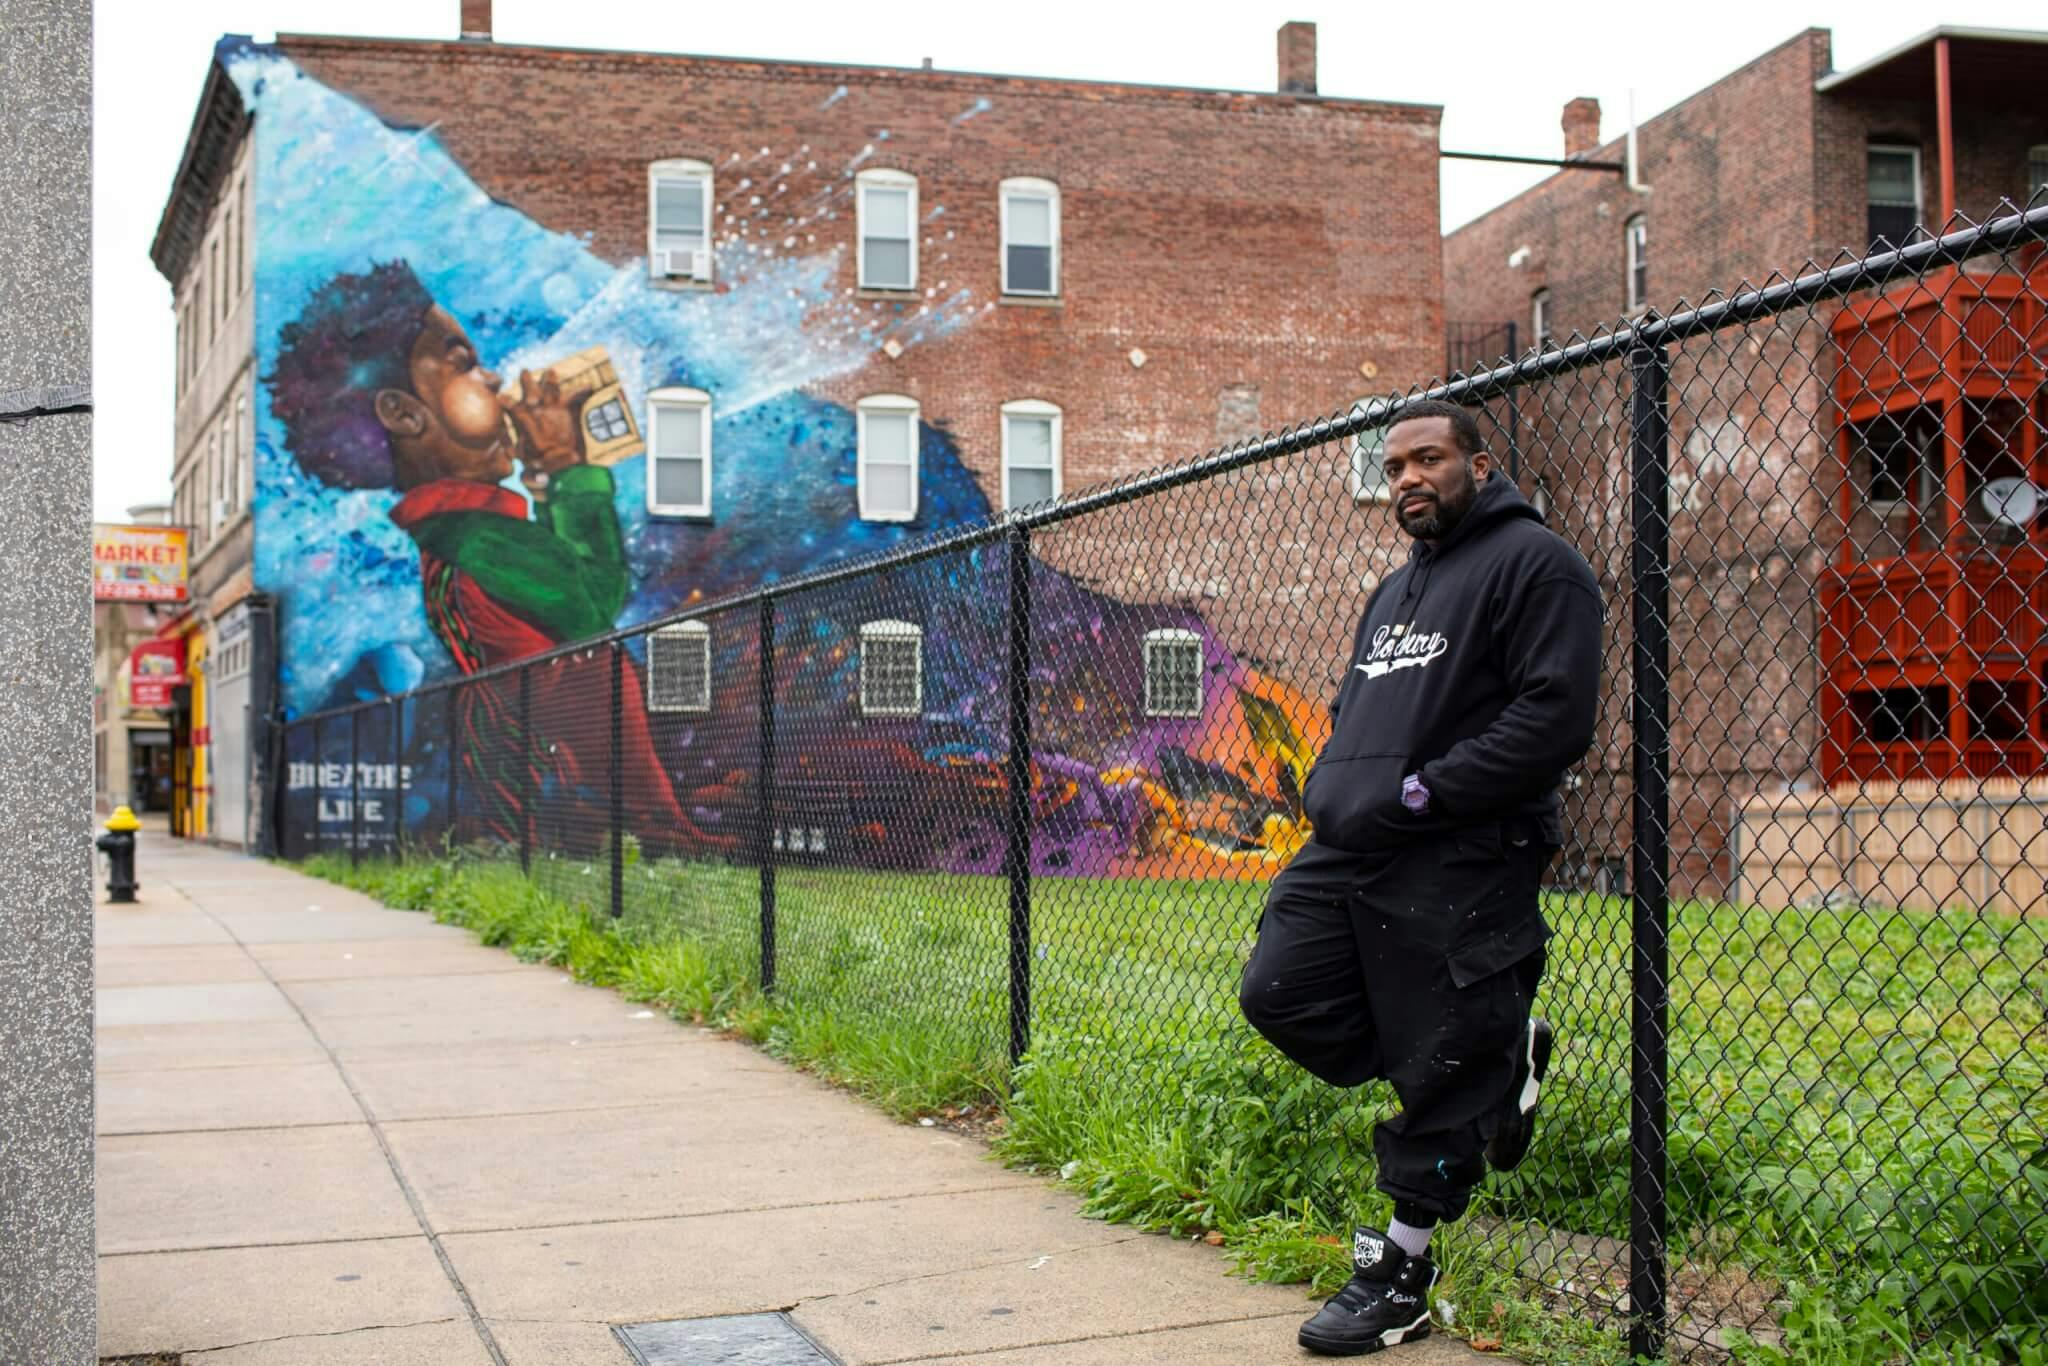 An artist stands by a fence in front of a colorful mural, in the neighborhood of Dorchester.